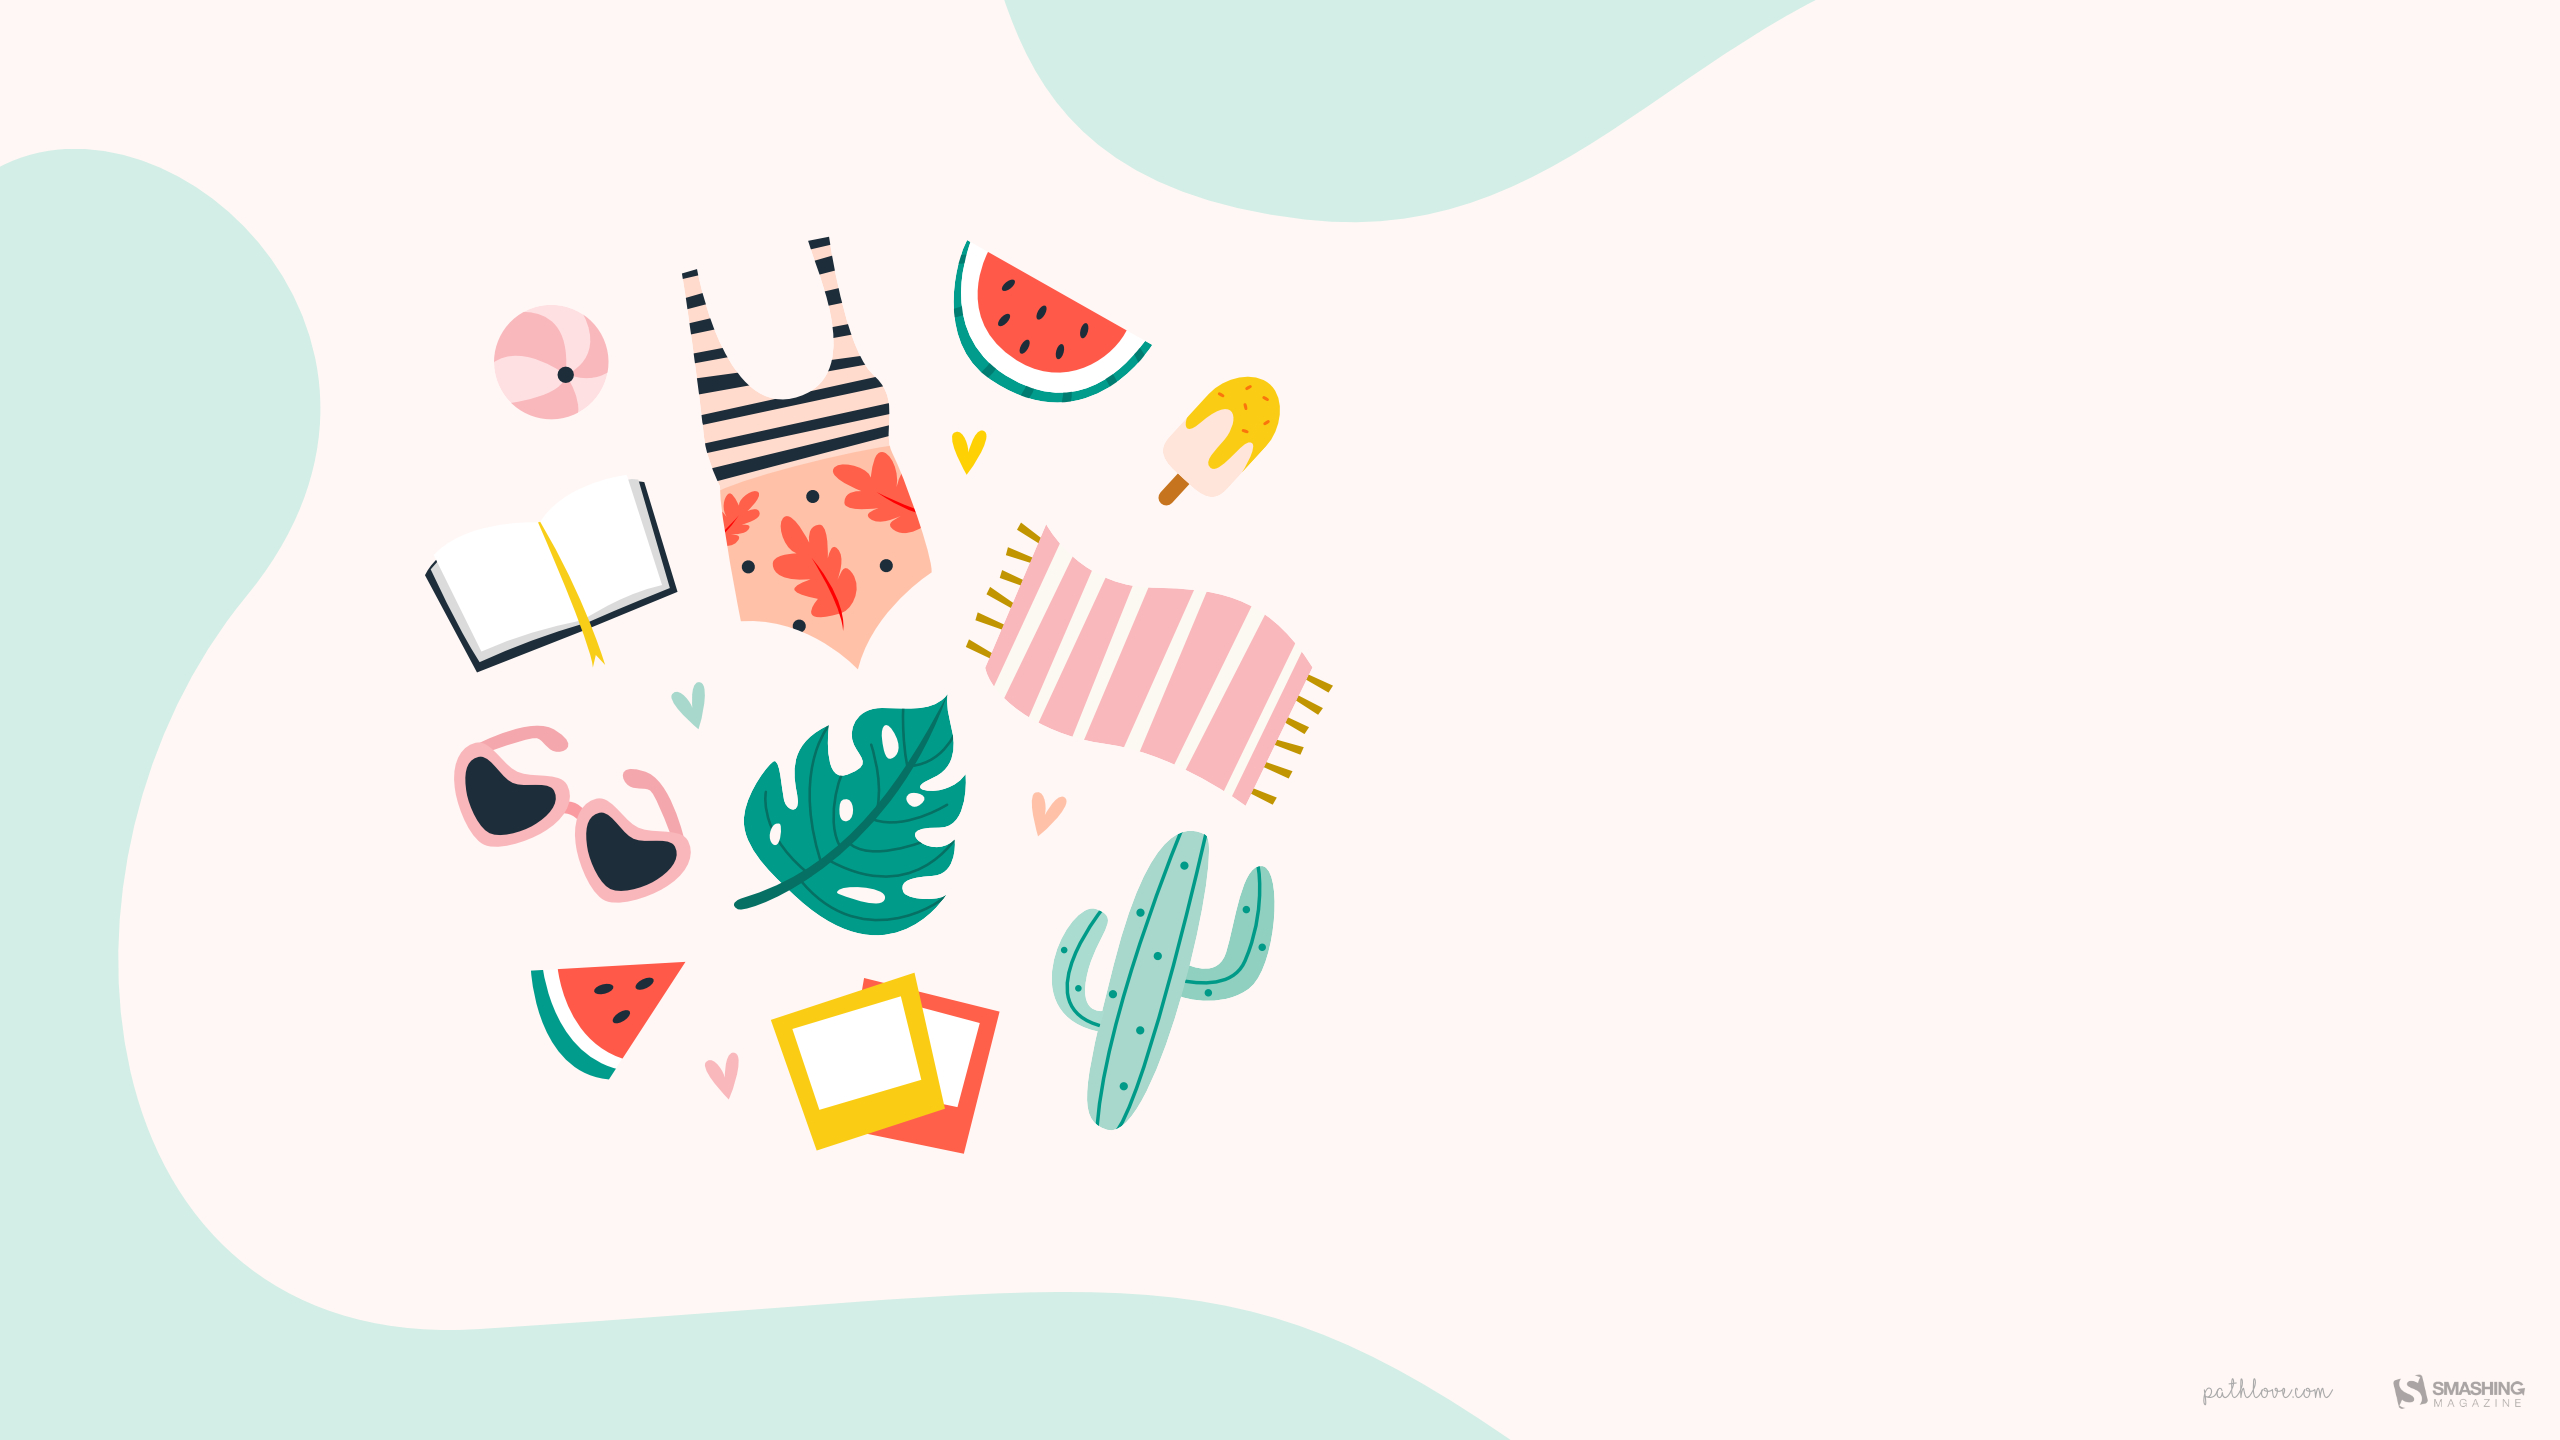 A pastel illustration of a woman in a bikini, surrounded by watermelon slices, palm leaves, and other beachy elements. - 2560x1440